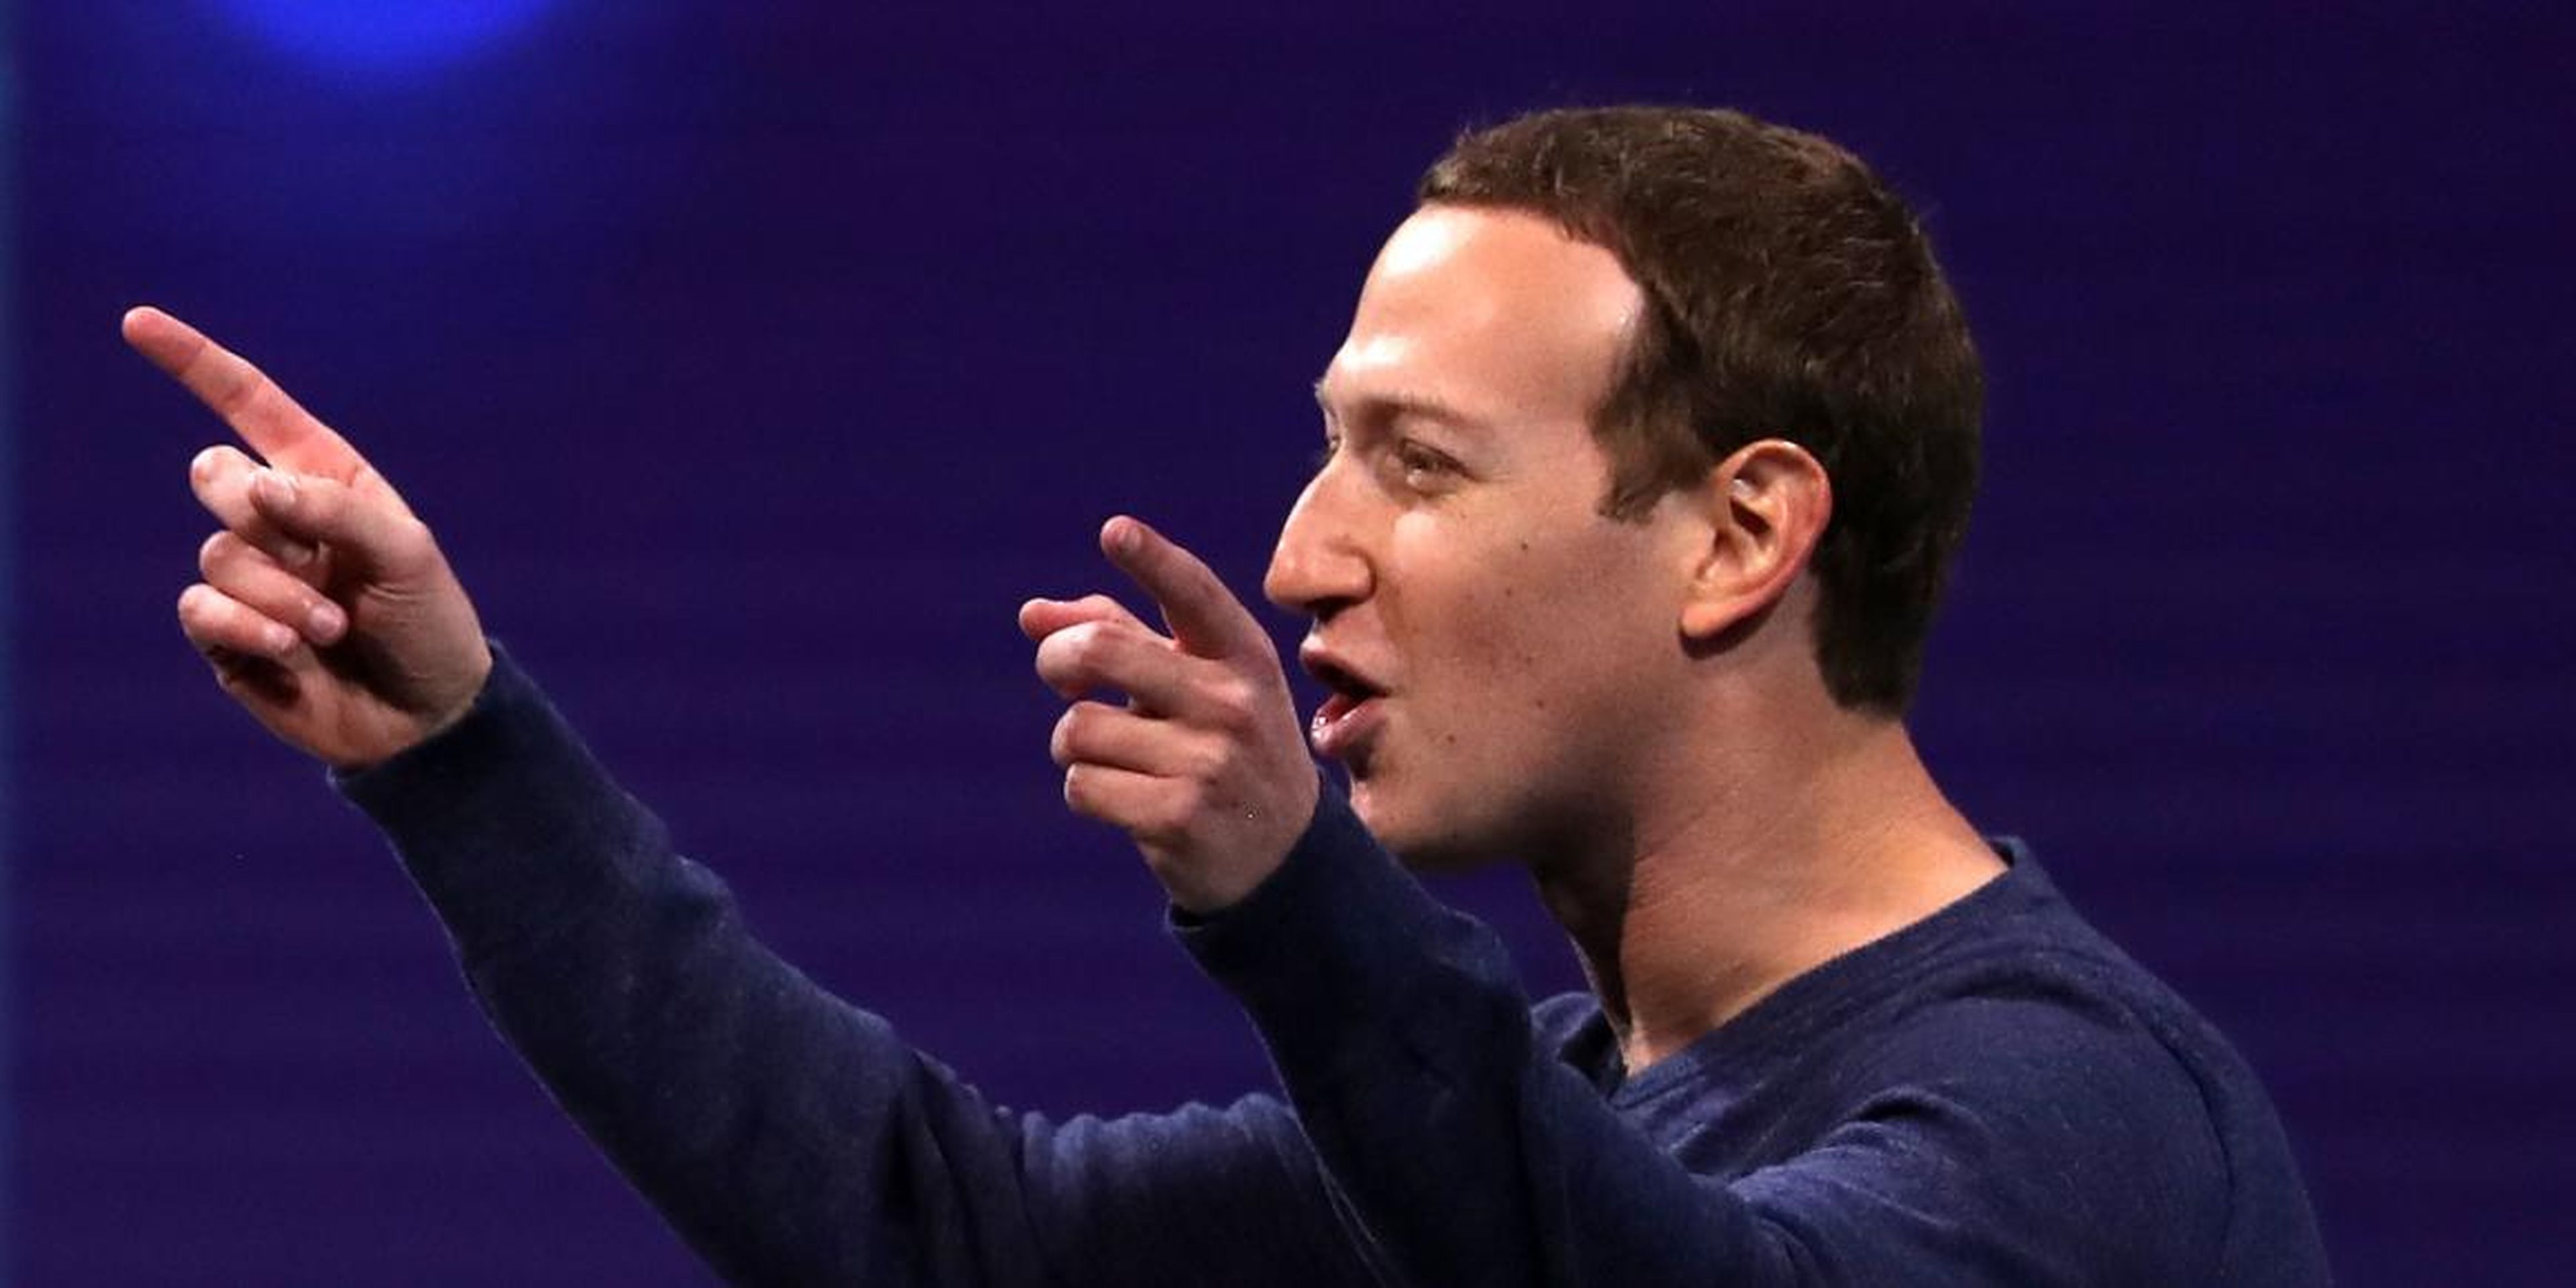 Facebook's biggest event of the year revealed an uncomfortable truth